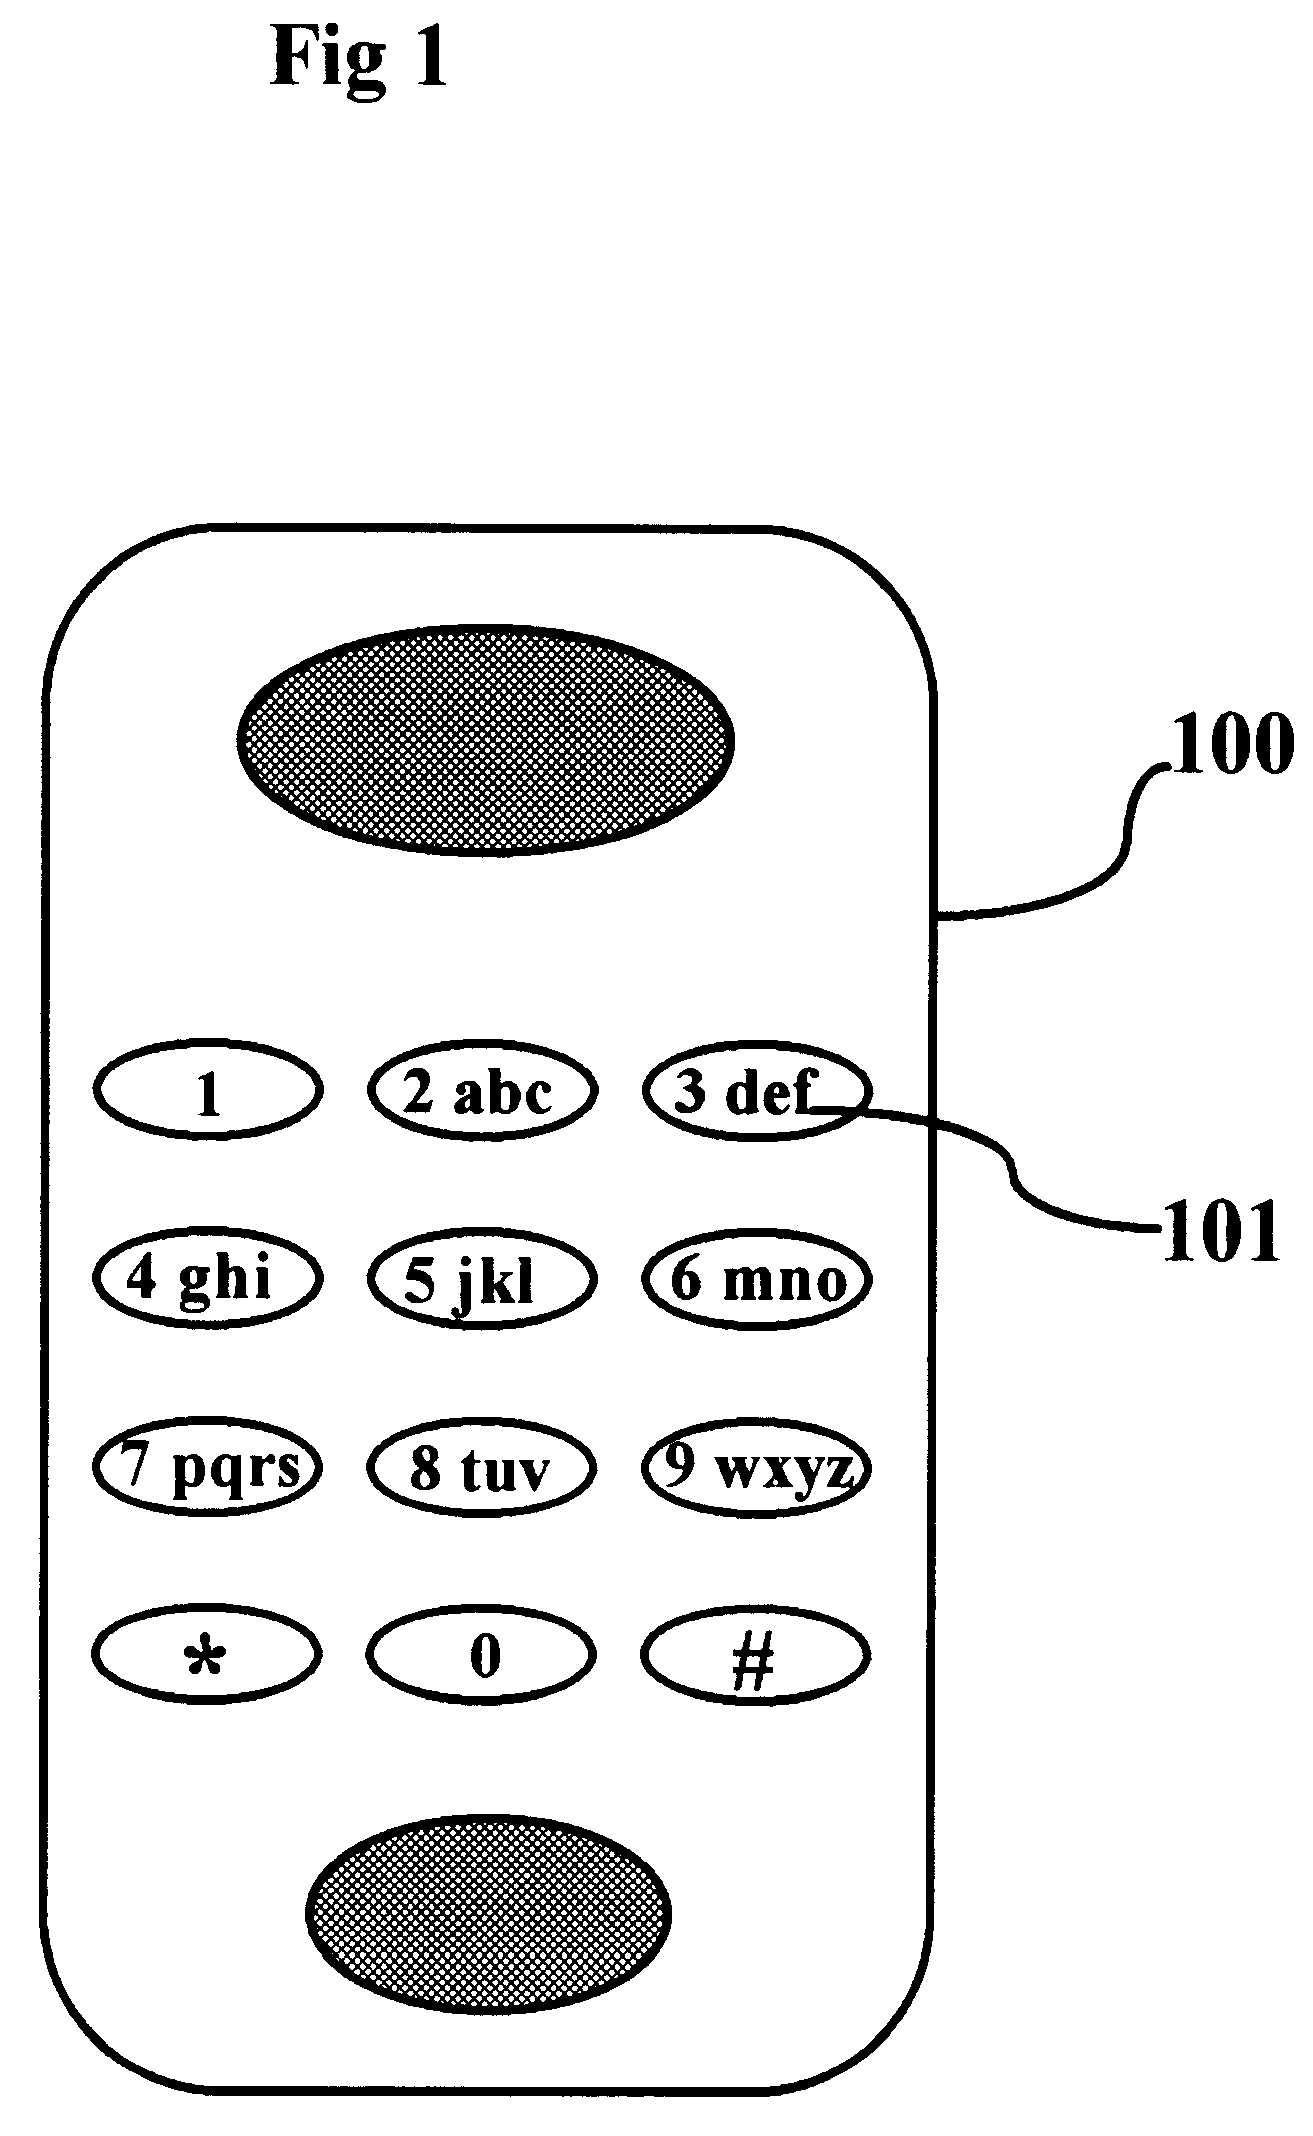 Method and apparatus for improved multi-tap text input